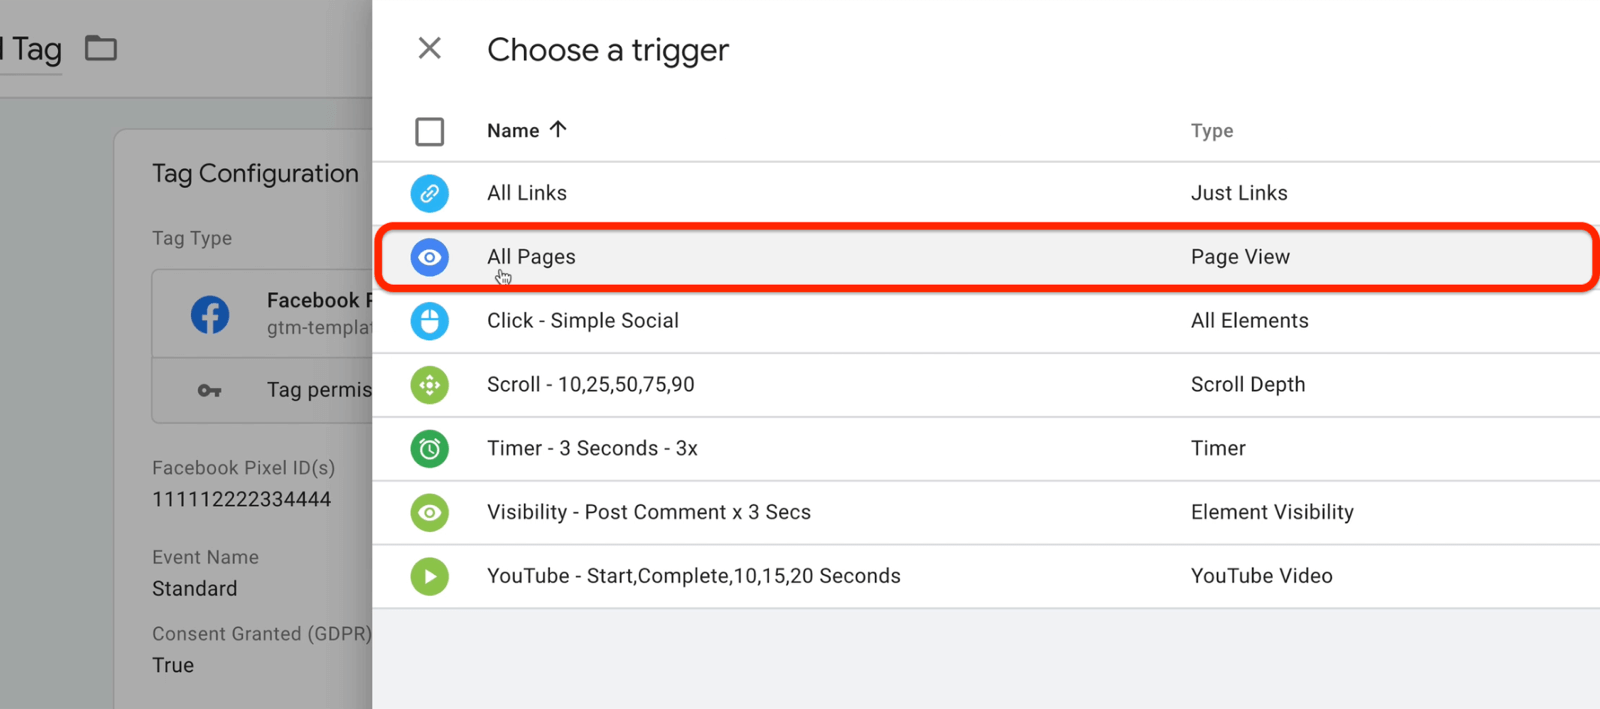 google tag manager new tag with choose a trigger menu options with all pages selected and highlighted